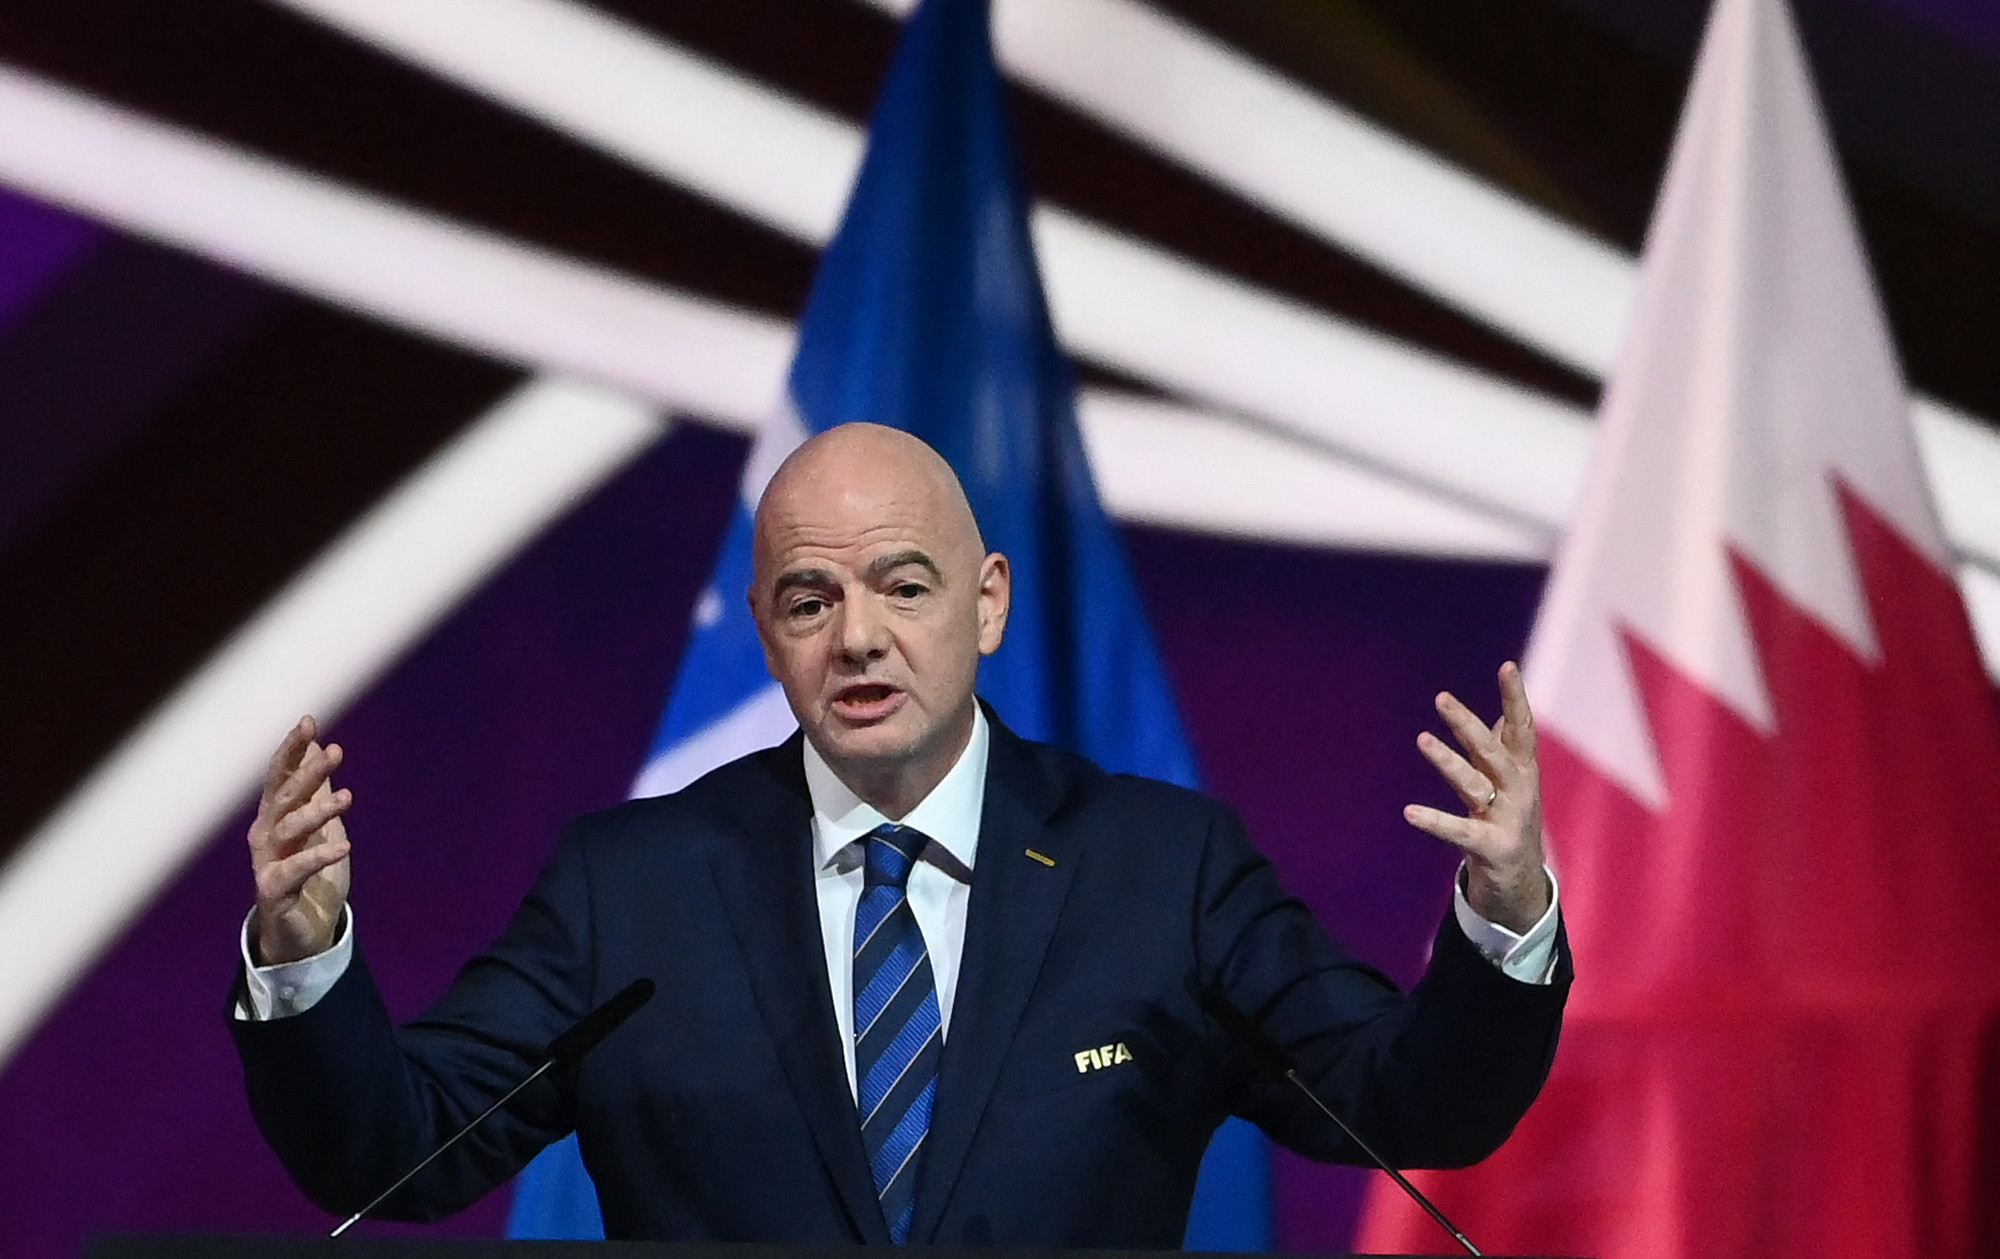 Gianni Infantino claims that staging the World Cup in Qatar has driven it to adopt a series of labour reforms which better protect workers’ human rights ©Getty Images